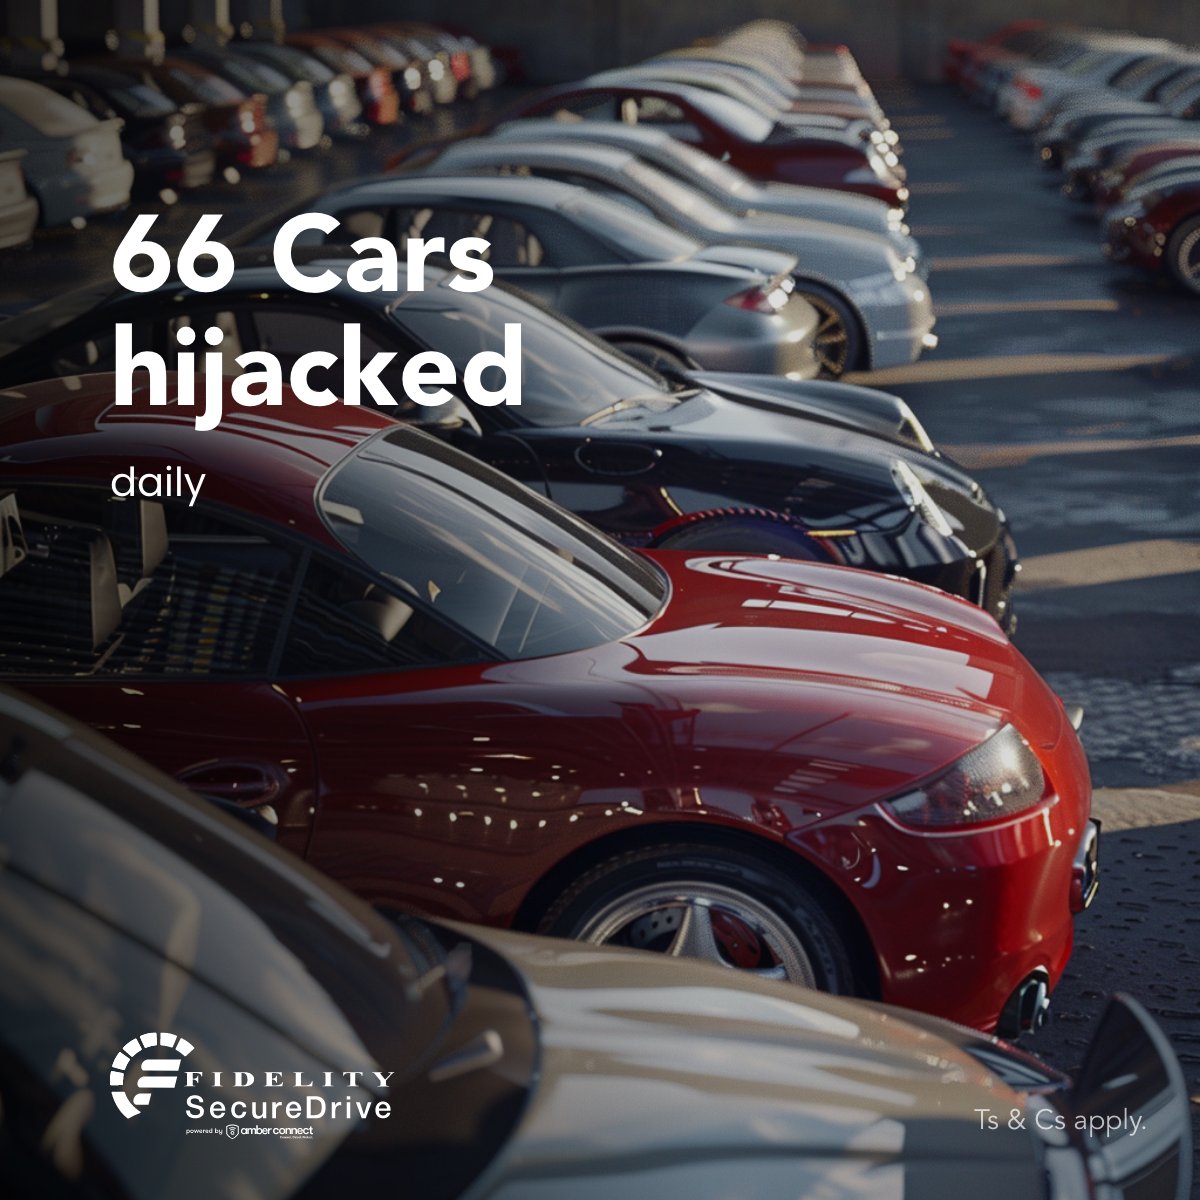 Vehicle hijackings are up by 6.5% over the past two years. Keep yours safe with Fidelity SecureDrive’s vehicle tracking power.

#FidelitySecureDrive #VehicleTracking #YourDrivingCompanion